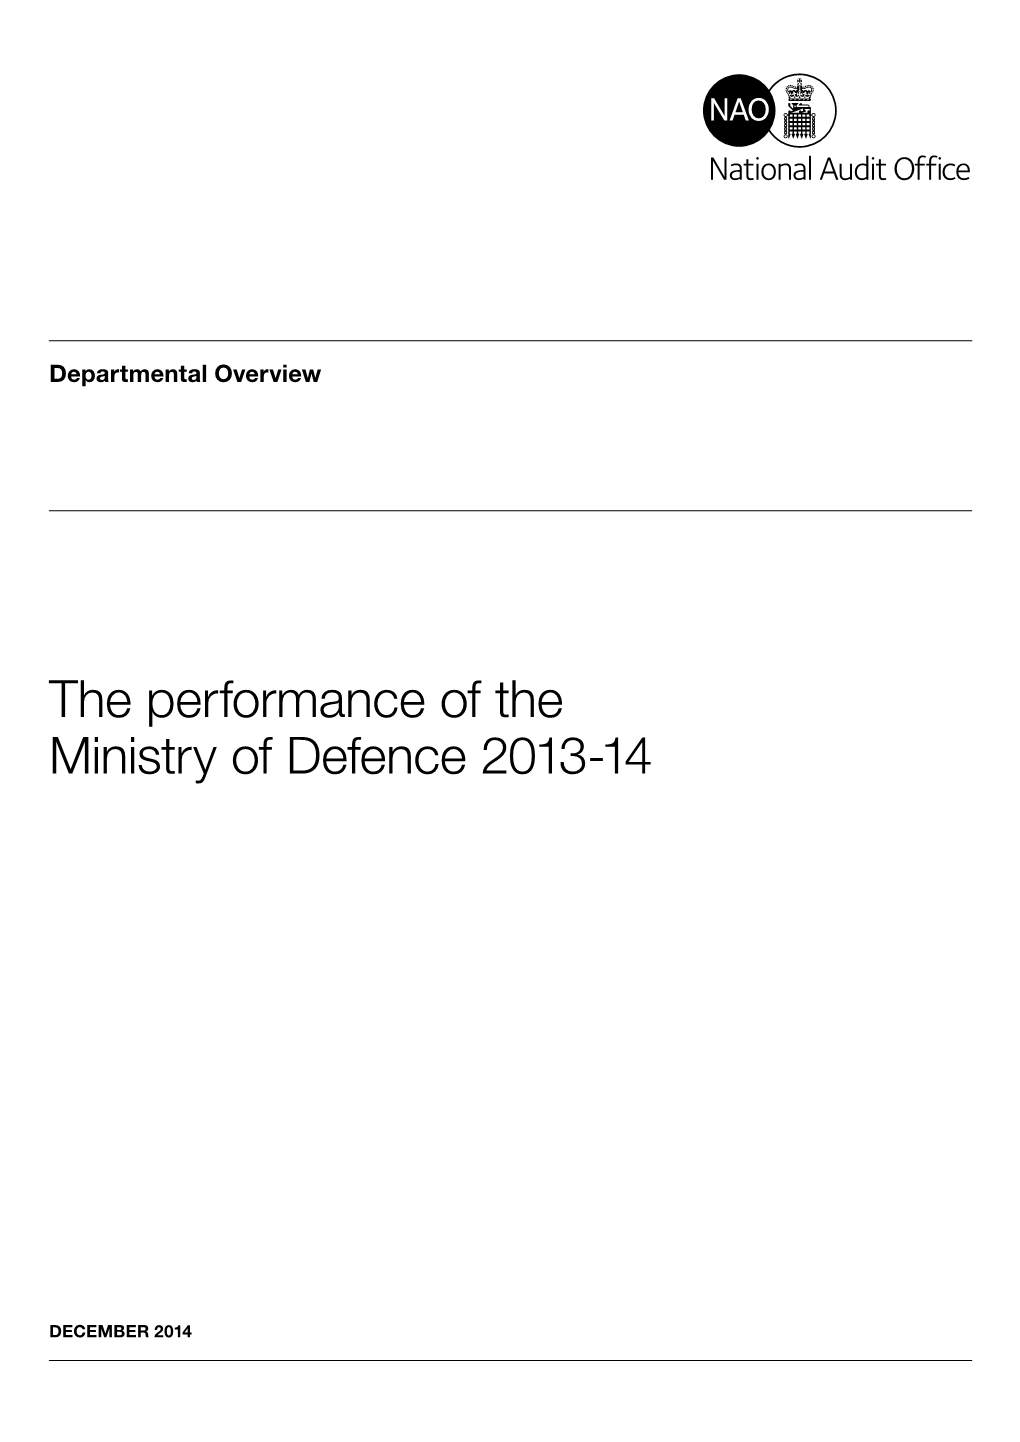 The Performance of the Ministry of Defence 2013-14